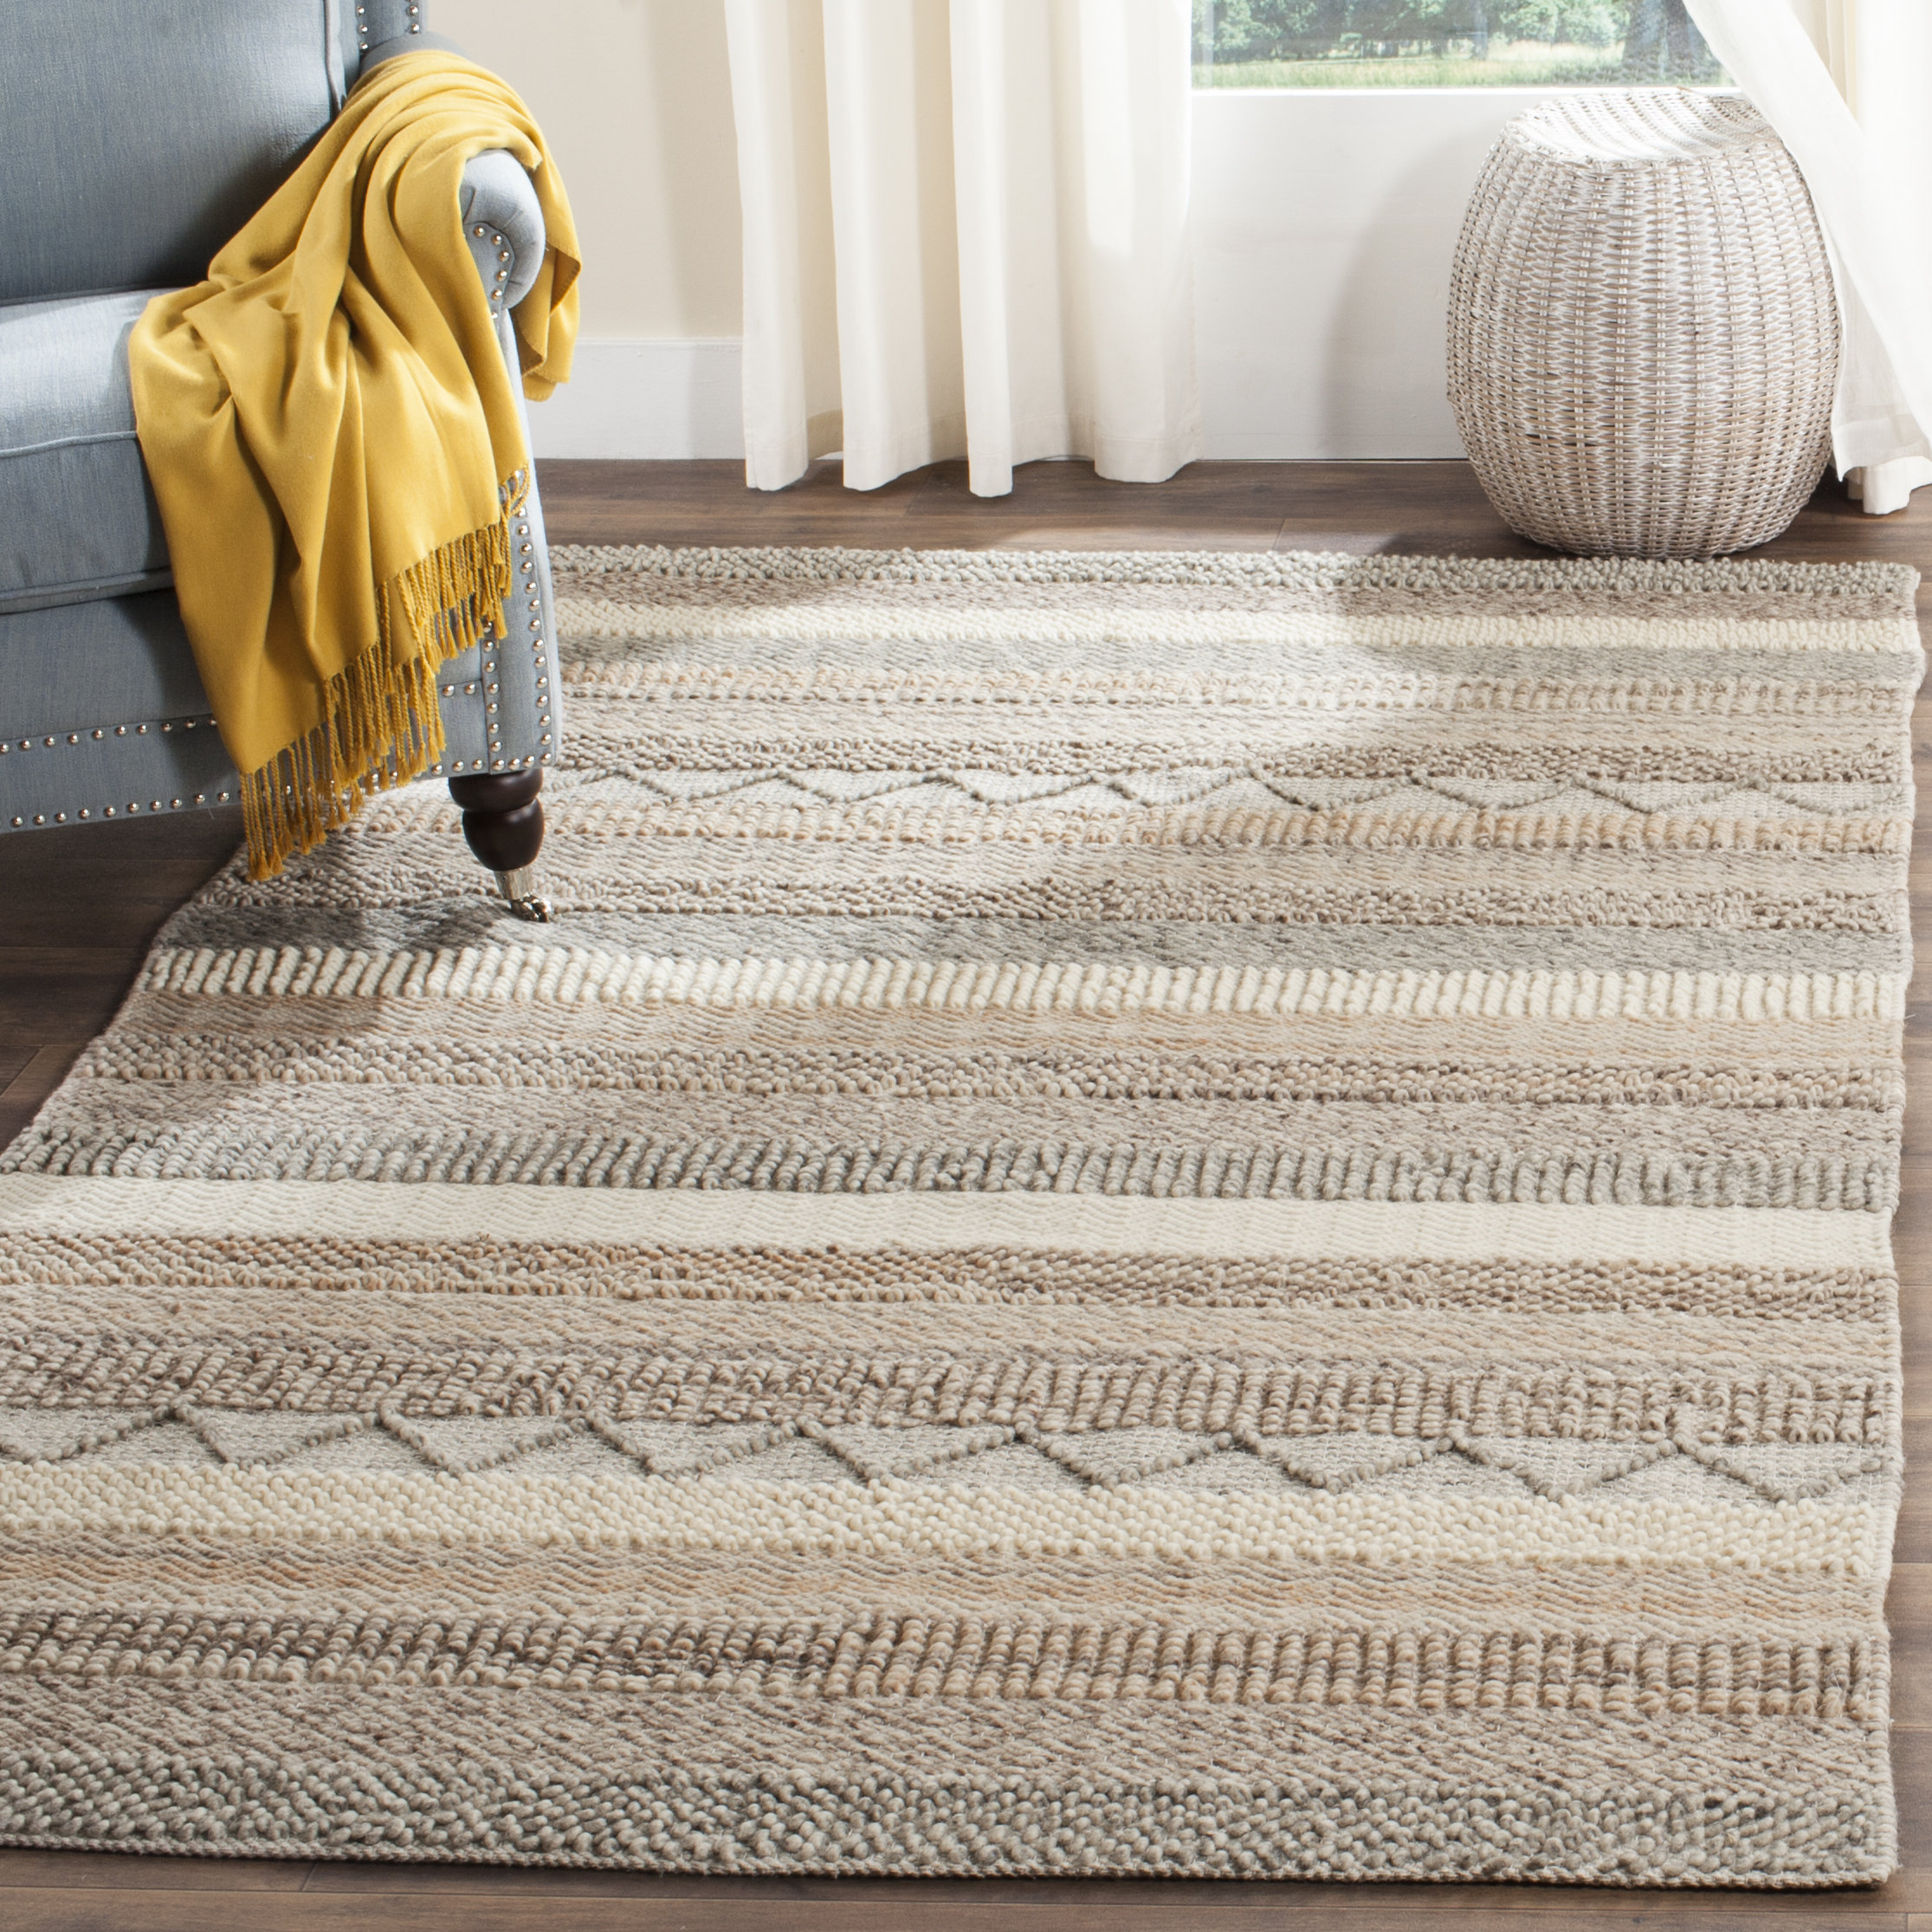 Hand Woven Cotton Rug Flat Pile Living Room Dining Hallway Office Bedroom 